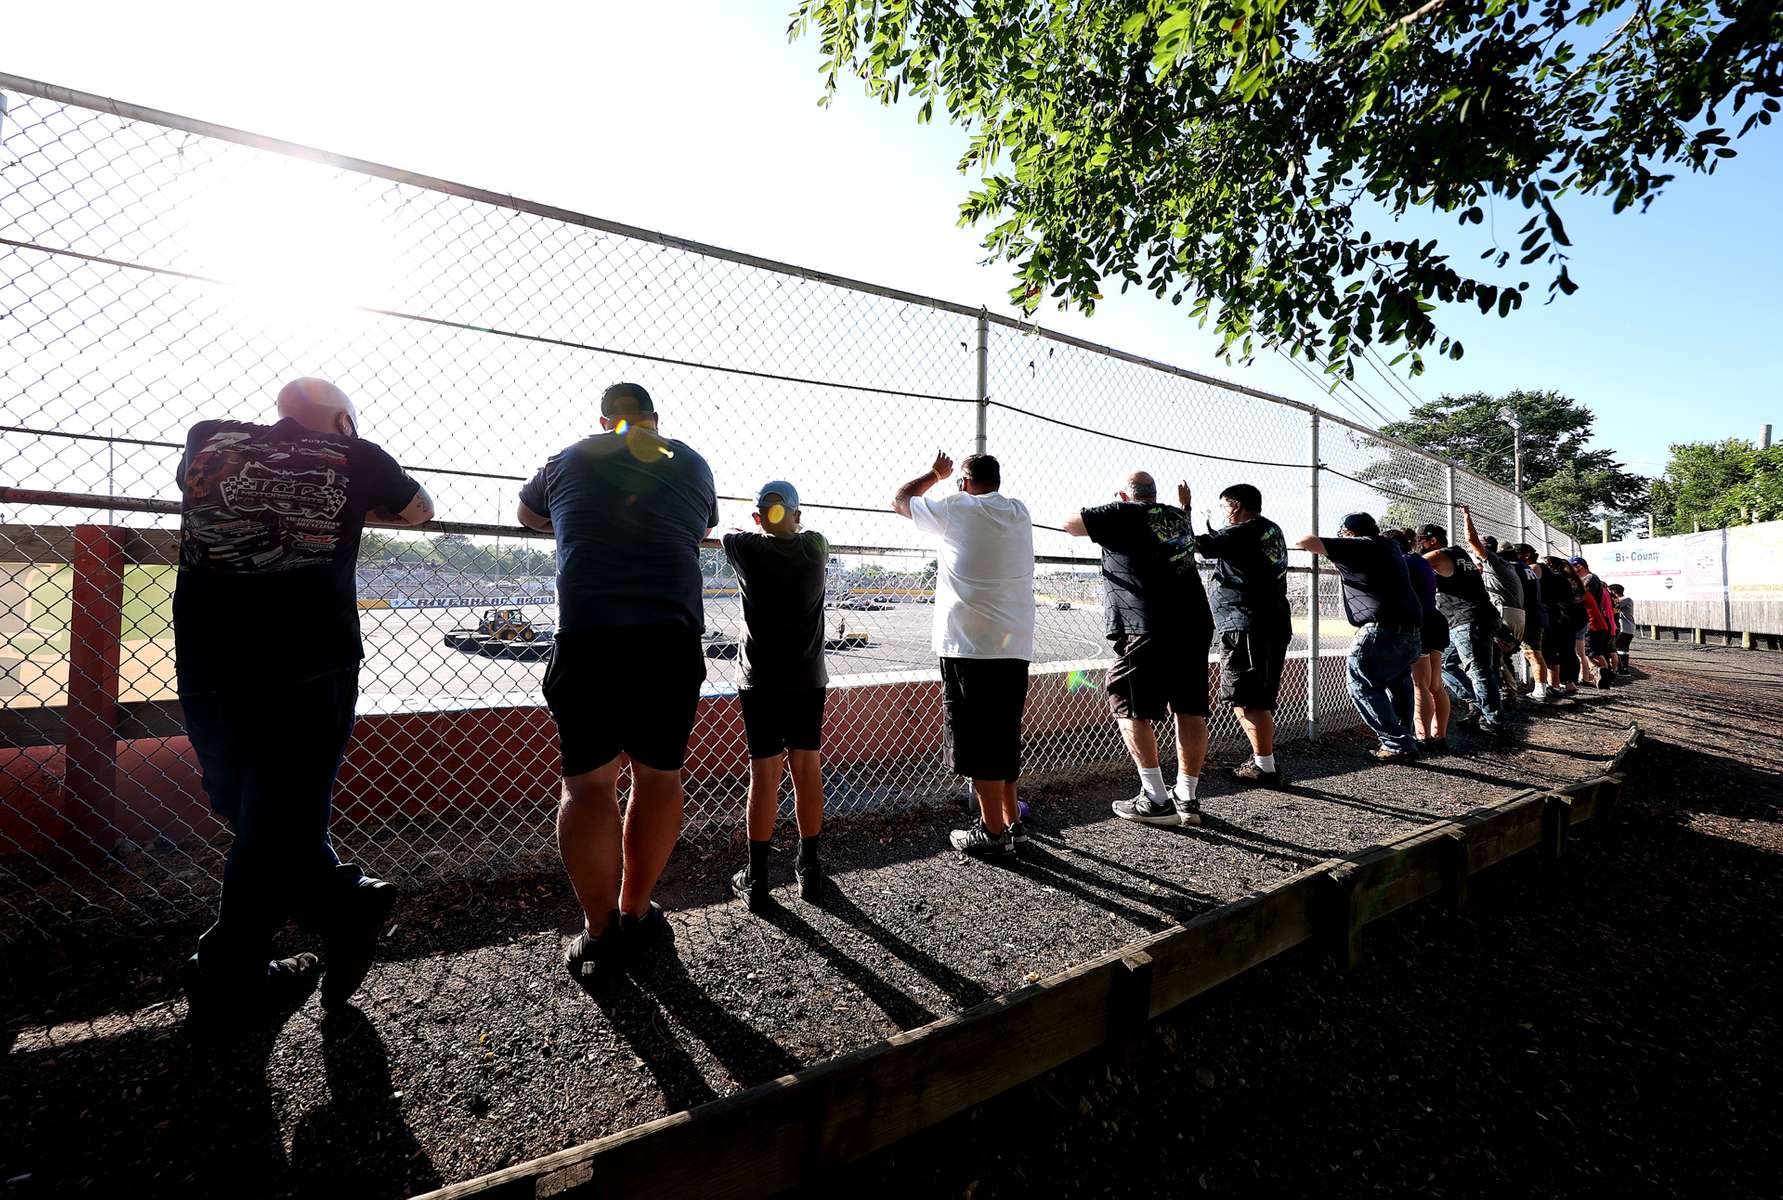 Fans watch cars racing around the track during NASCAR Advance Auto Series Opening Night at Riverhead Raceway on August 01, 2020 in Riverhead, New York.  The race track had been closed due to the coronavirus COVID-19 pandemic.  More than 4,585,258 people in the United States alone have been infected with the coronavirus and at least 154,000 have died. 